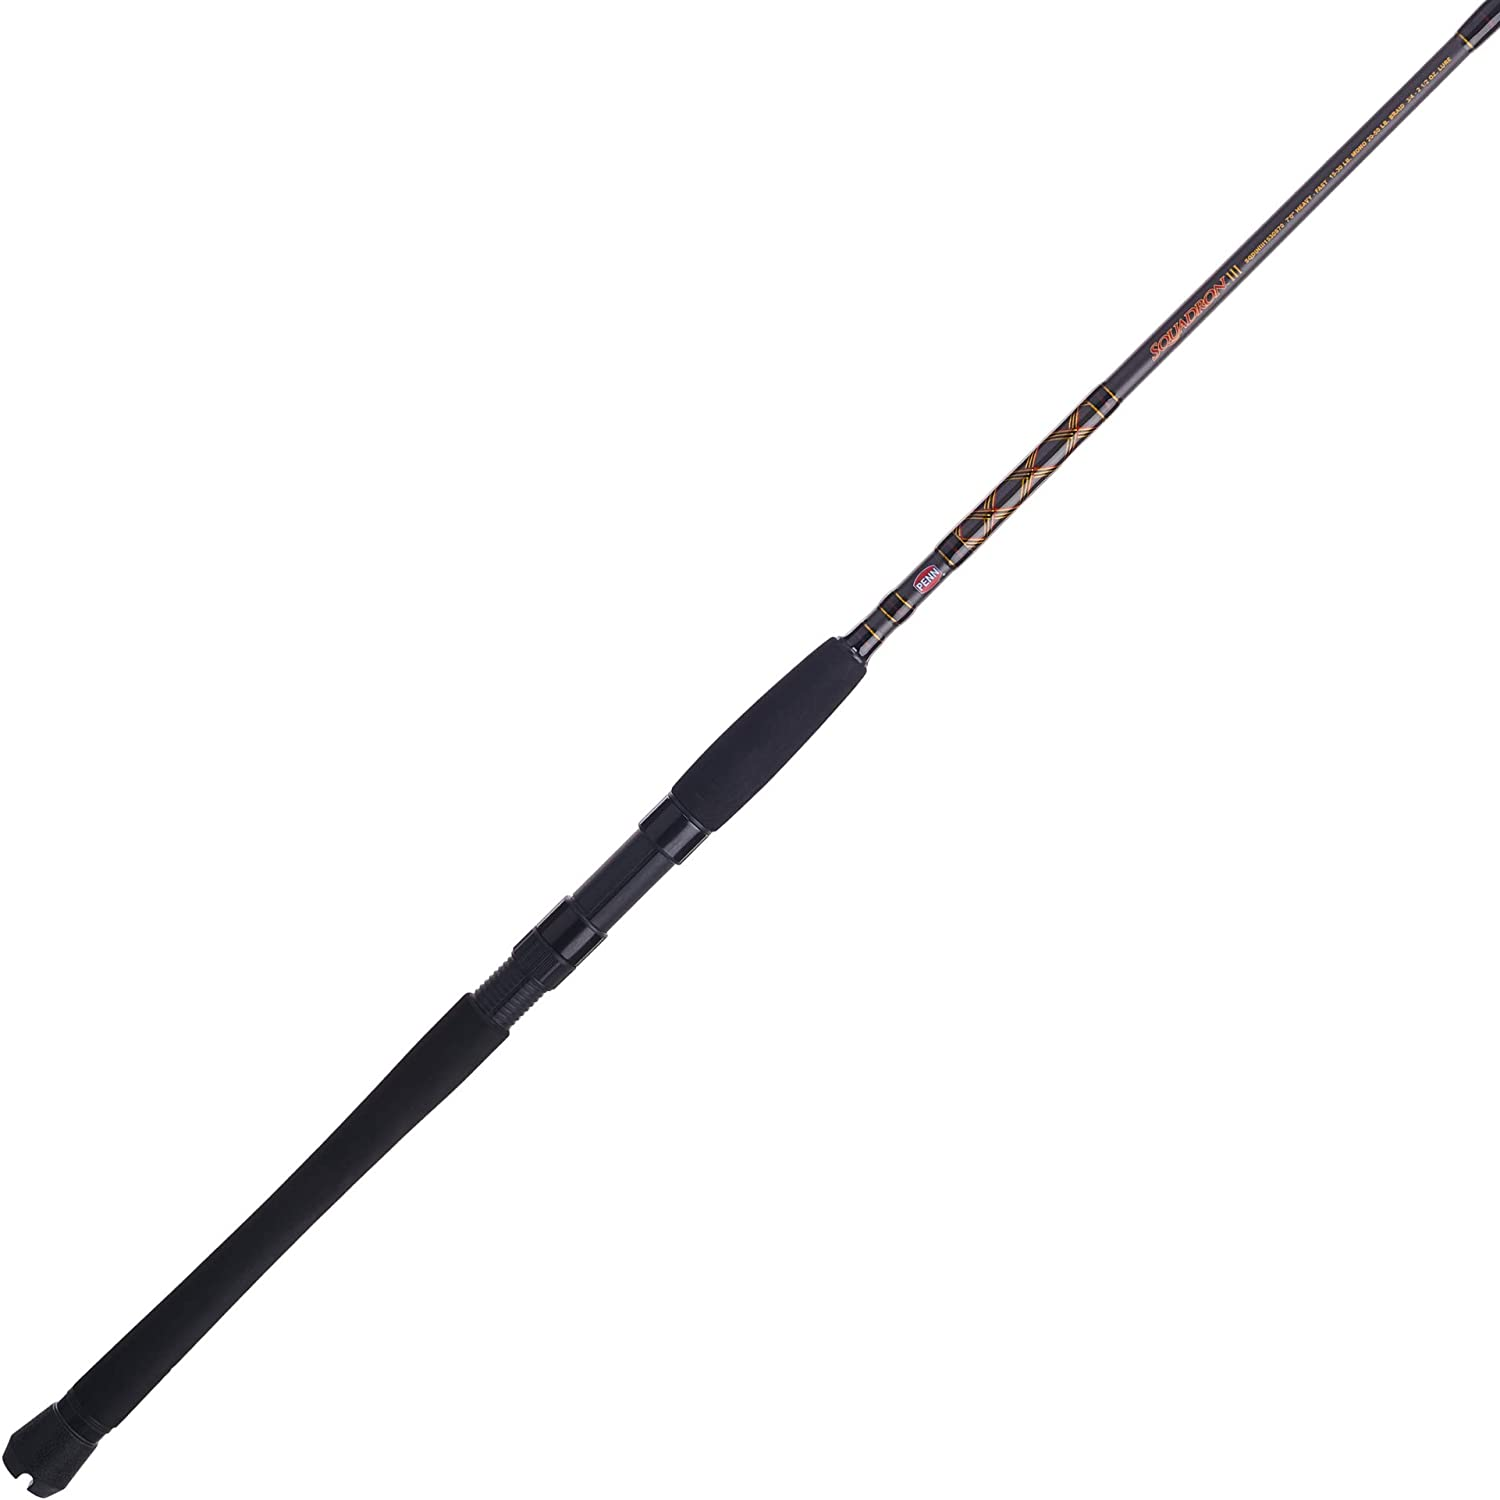 casting surf rod - Buy casting surf rod at Best Price in Malaysia